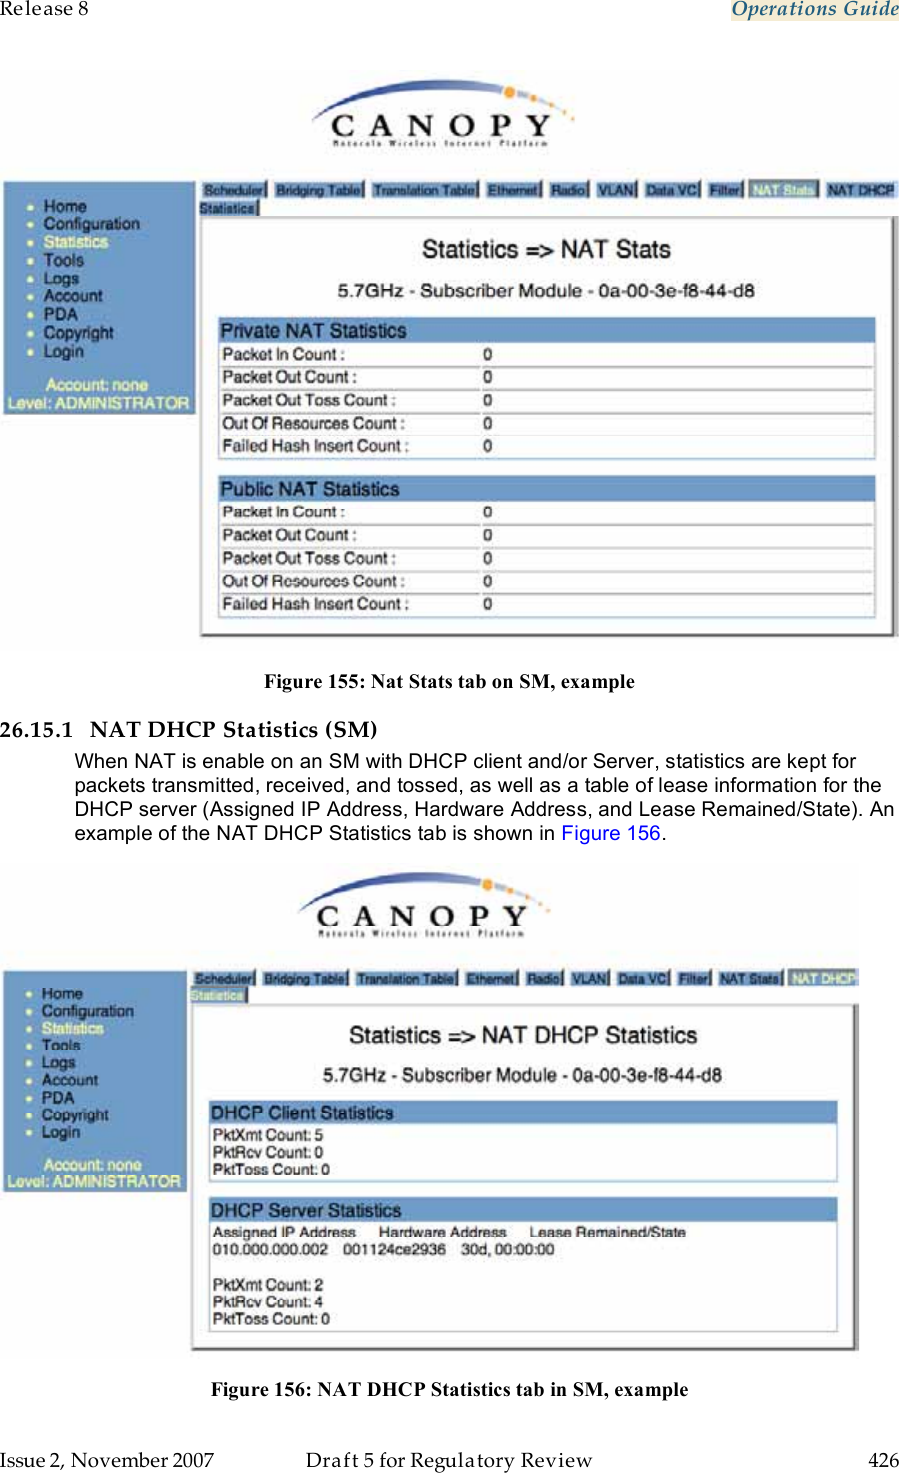 Release 8    Operations Guide   Issue 2, November 2007  Draft 5 for Regulatory Review  426      Figure 155: Nat Stats tab on SM, example 26.15.1 NAT DHCP Statistics (SM) When NAT is enable on an SM with DHCP client and/or Server, statistics are kept for packets transmitted, received, and tossed, as well as a table of lease information for the DHCP server (Assigned IP Address, Hardware Address, and Lease Remained/State). An example of the NAT DHCP Statistics tab is shown in Figure 156.  Figure 156: NAT DHCP Statistics tab in SM, example 